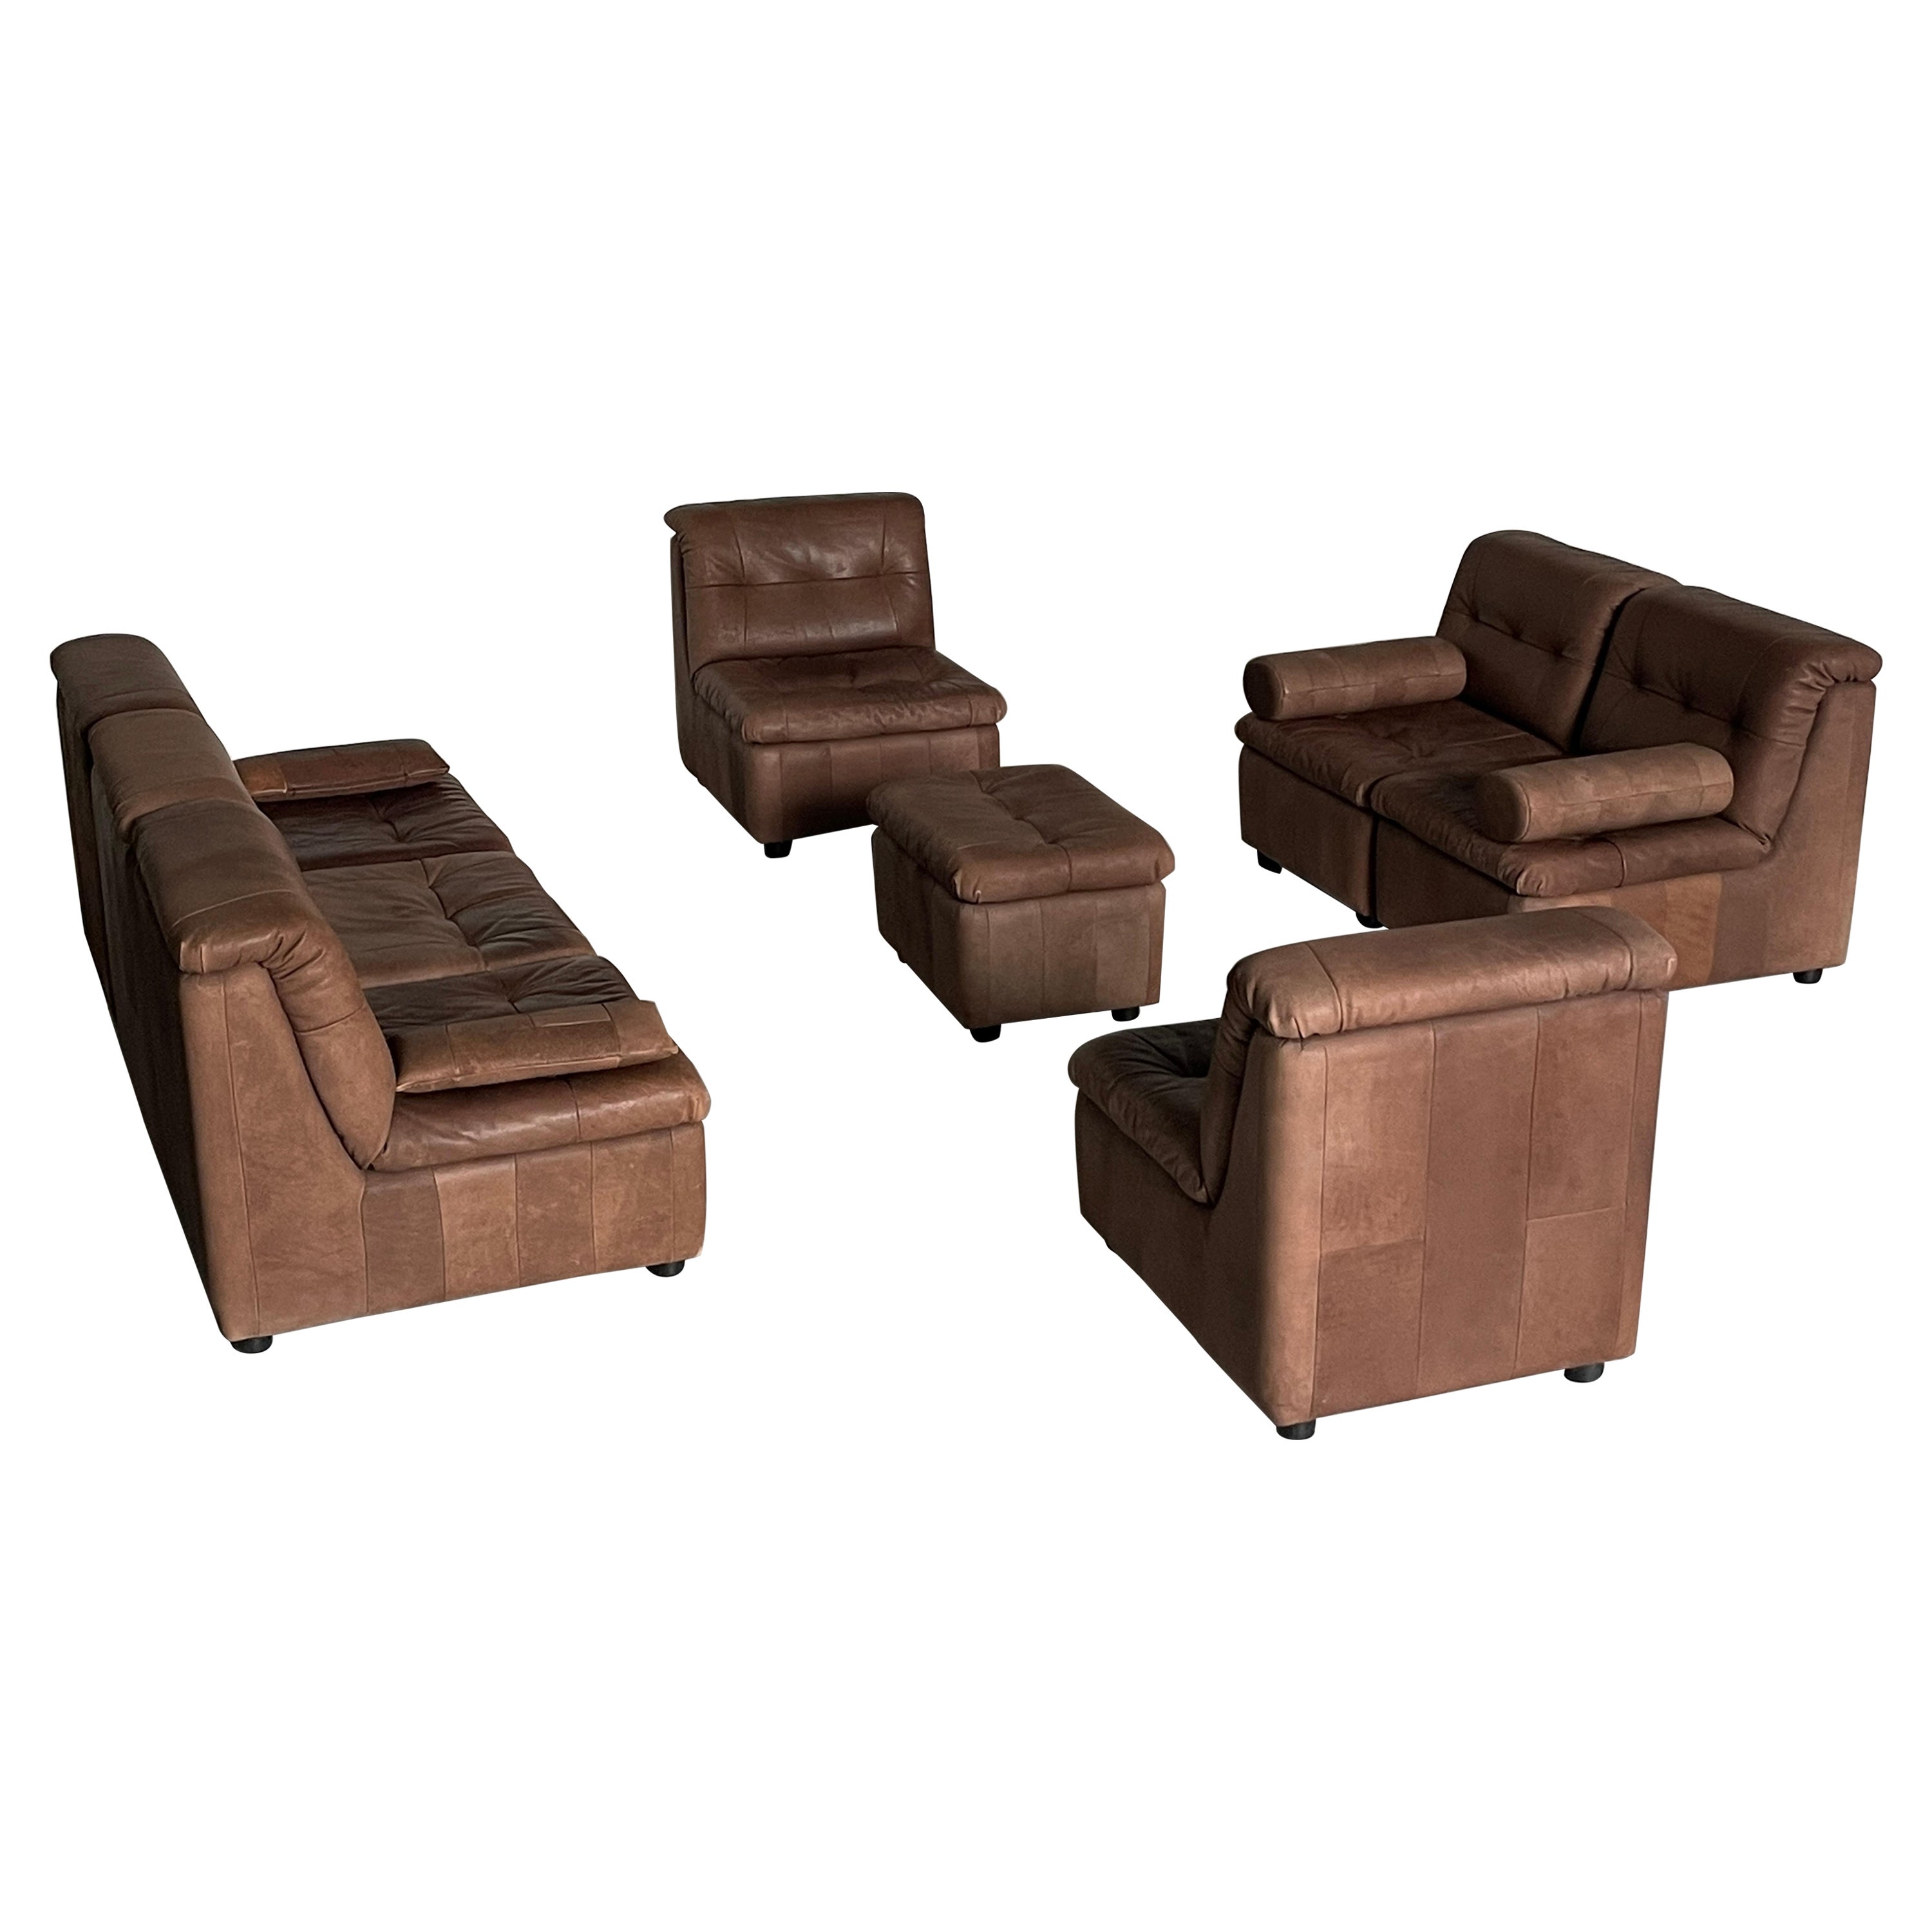 Mid-Century-Modern Patchwork Leather Modular Seating Set in the style of De Sede For Sale